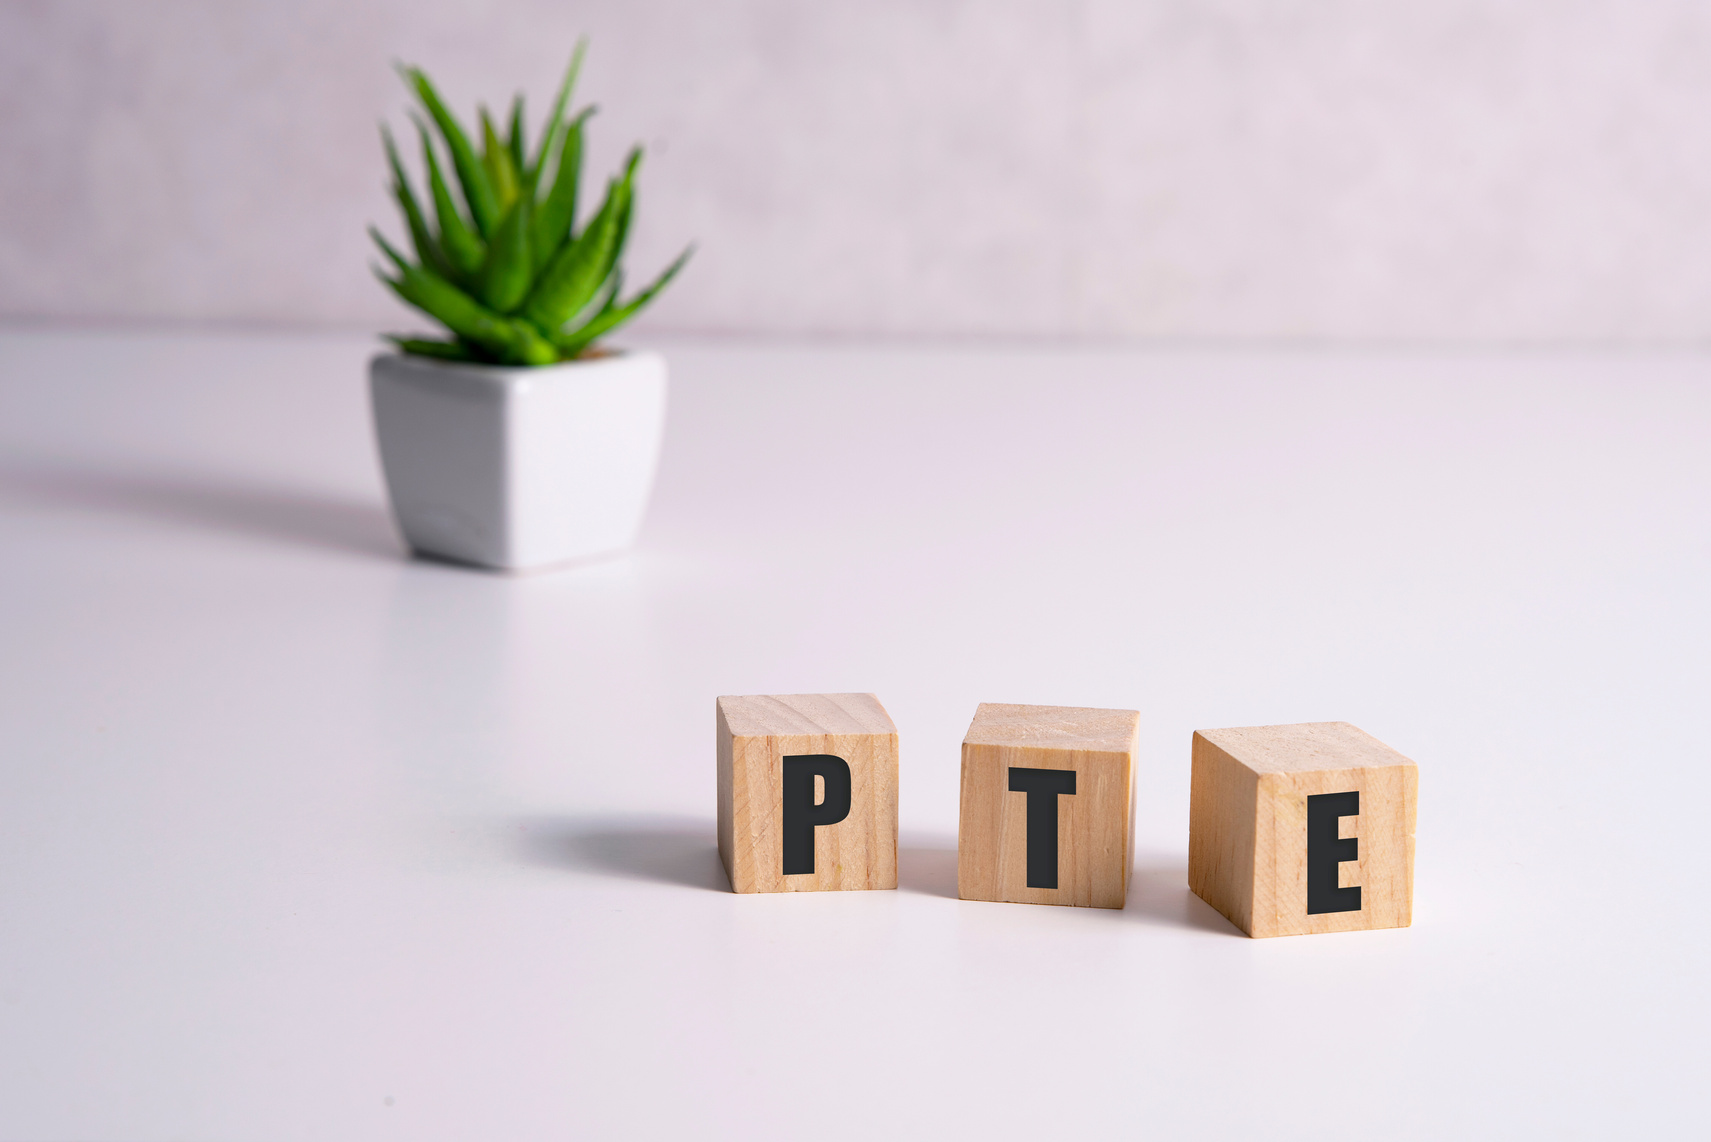 PTE - acronym from wooden blocks with letters, Pearson Tests of English PTE concept Foreign Language exams, top view on white background.